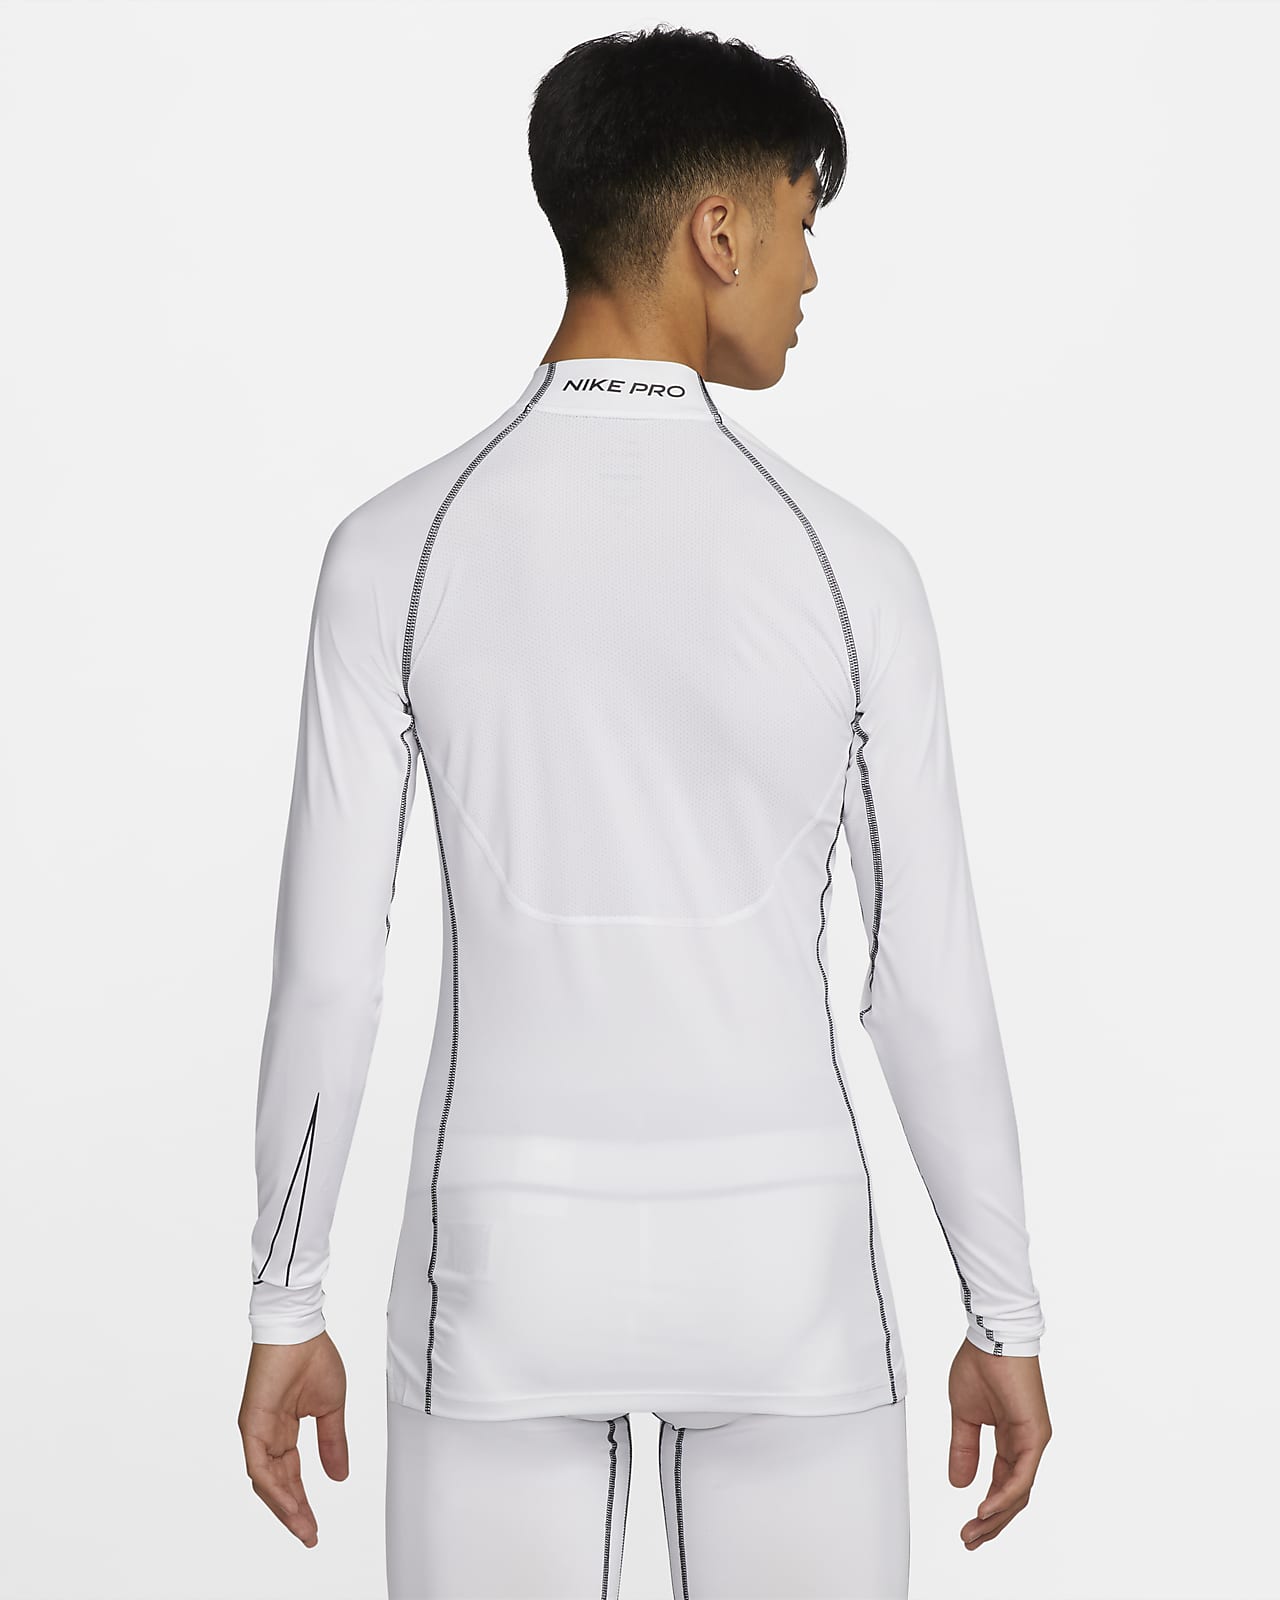 Nike Men's Dri-FIT Compression Long Sleeve Top - Running Warehouse Europe